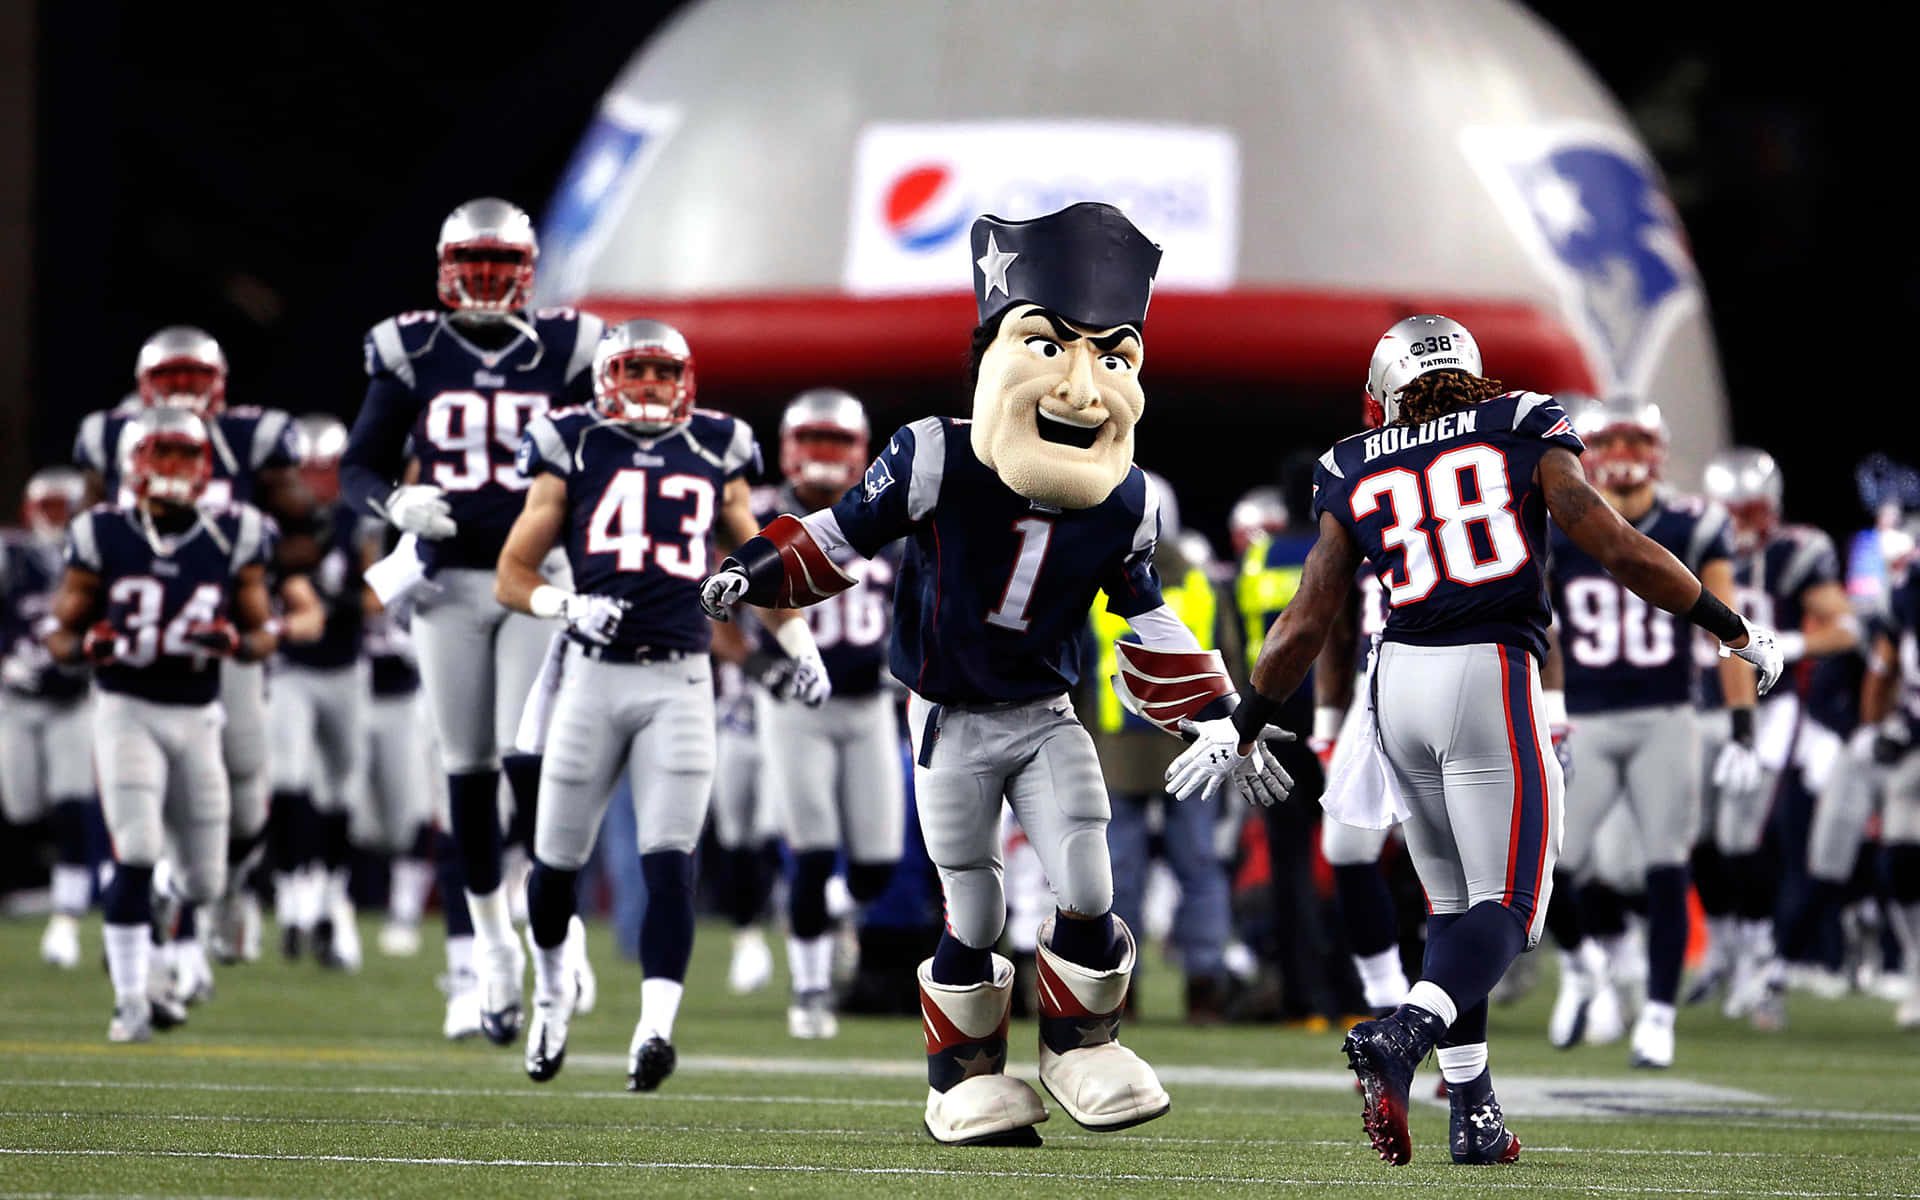 Show Your Pride With This Desktop Wallpaper Featuring The New England Patriots. Background